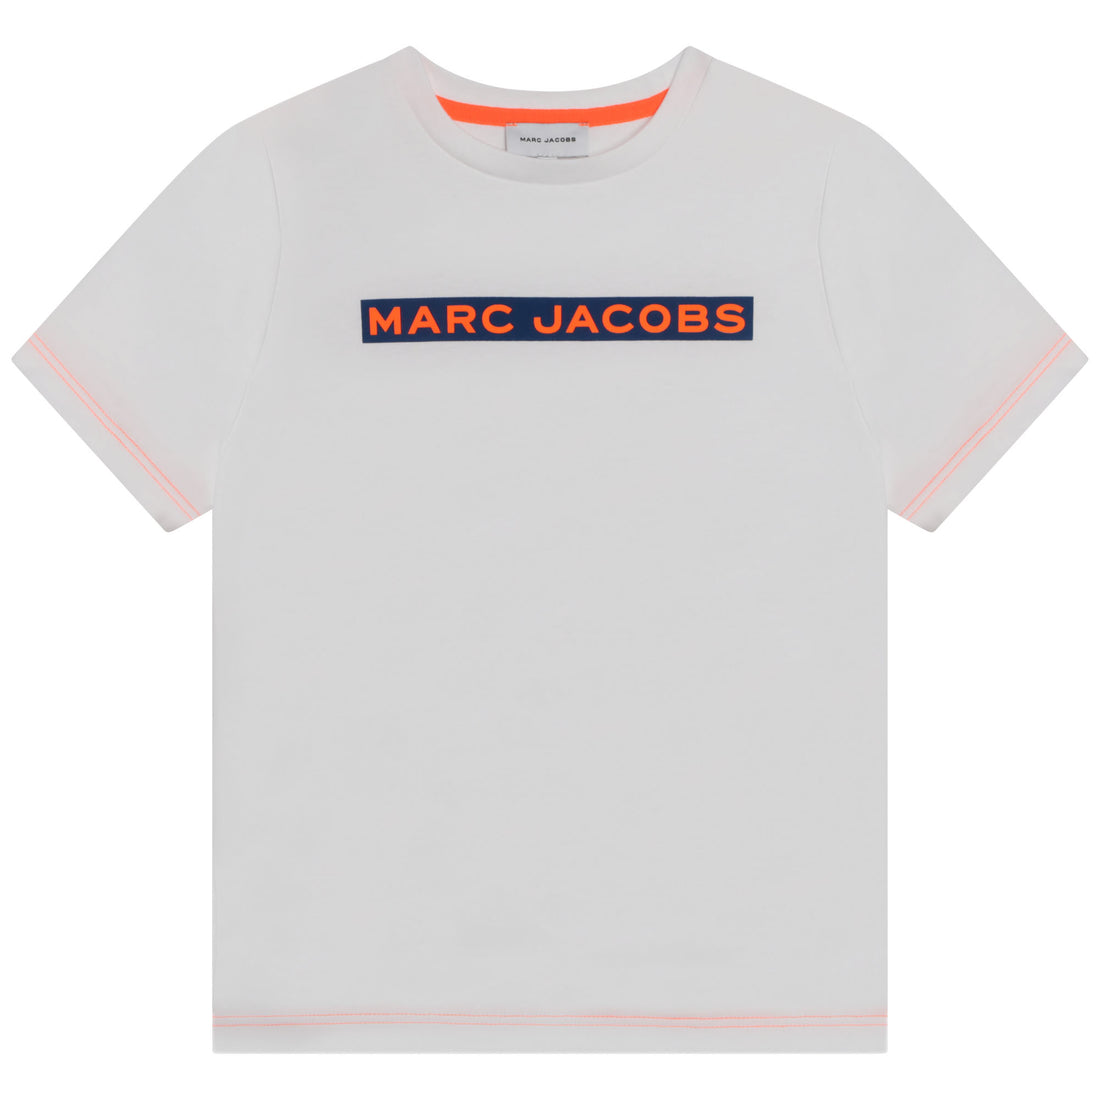 Marc Jacobs Short Sleeves Tee-Shirt Style: W25581